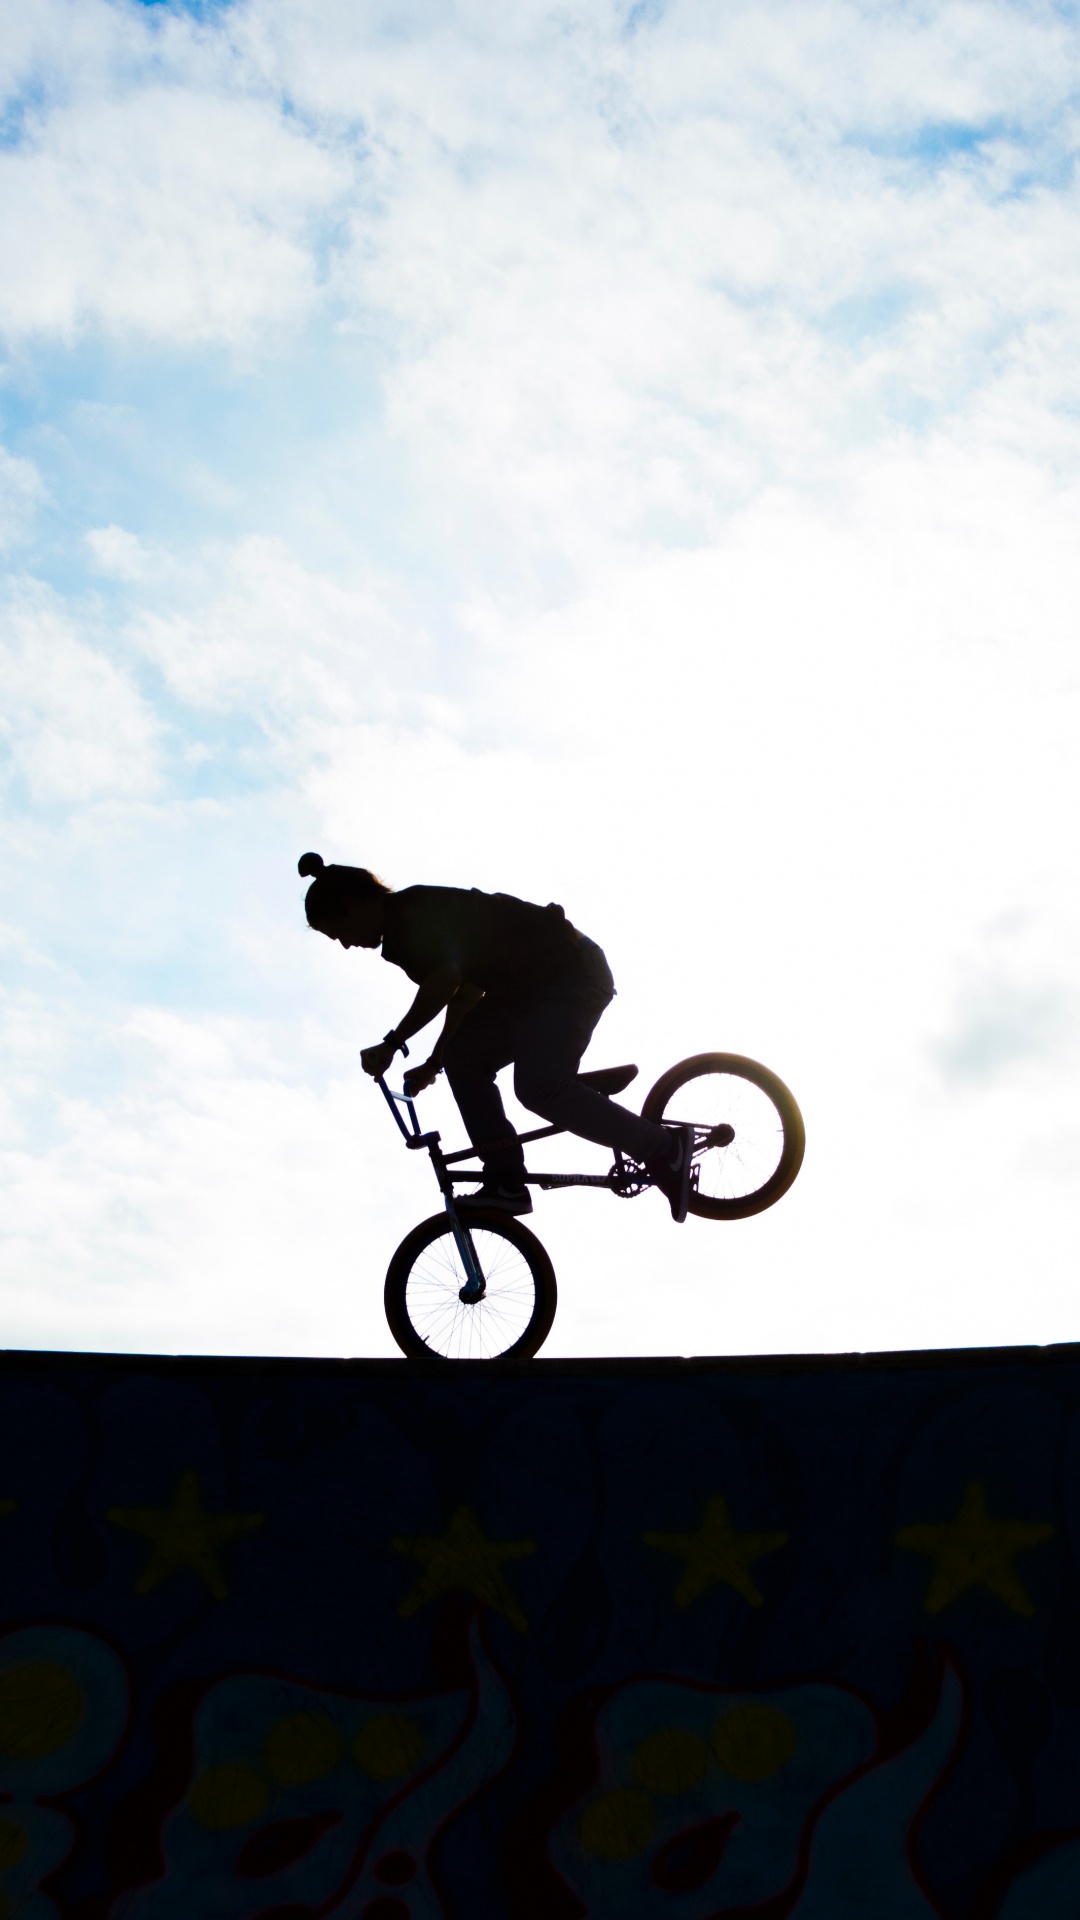 Man Riding Bicycle on Mid Air Under Blue Sky During Daytime. Wallpaper in 1080x1920 Resolution